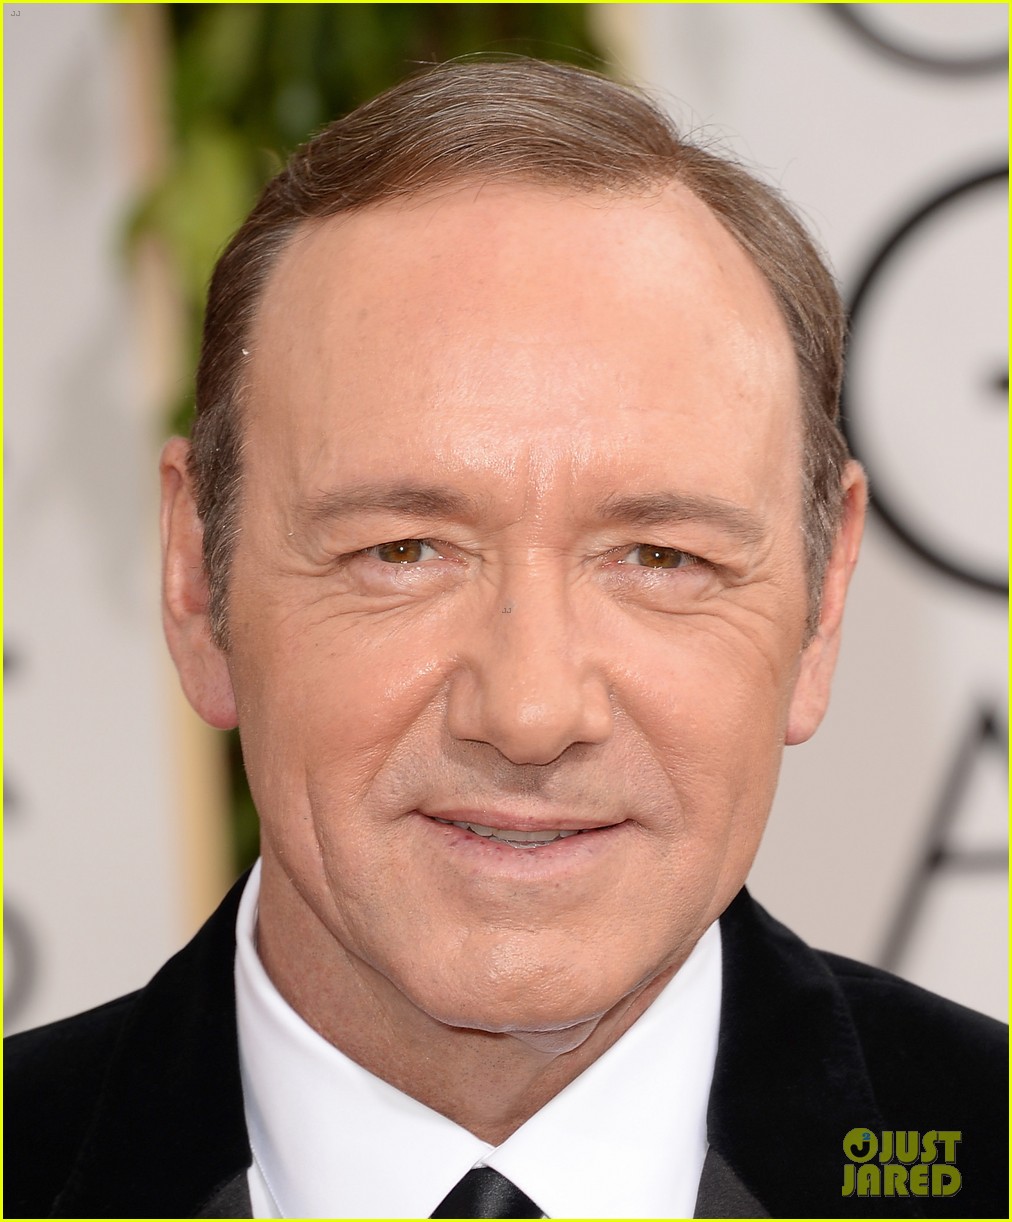 kevin-spacey-tattoos